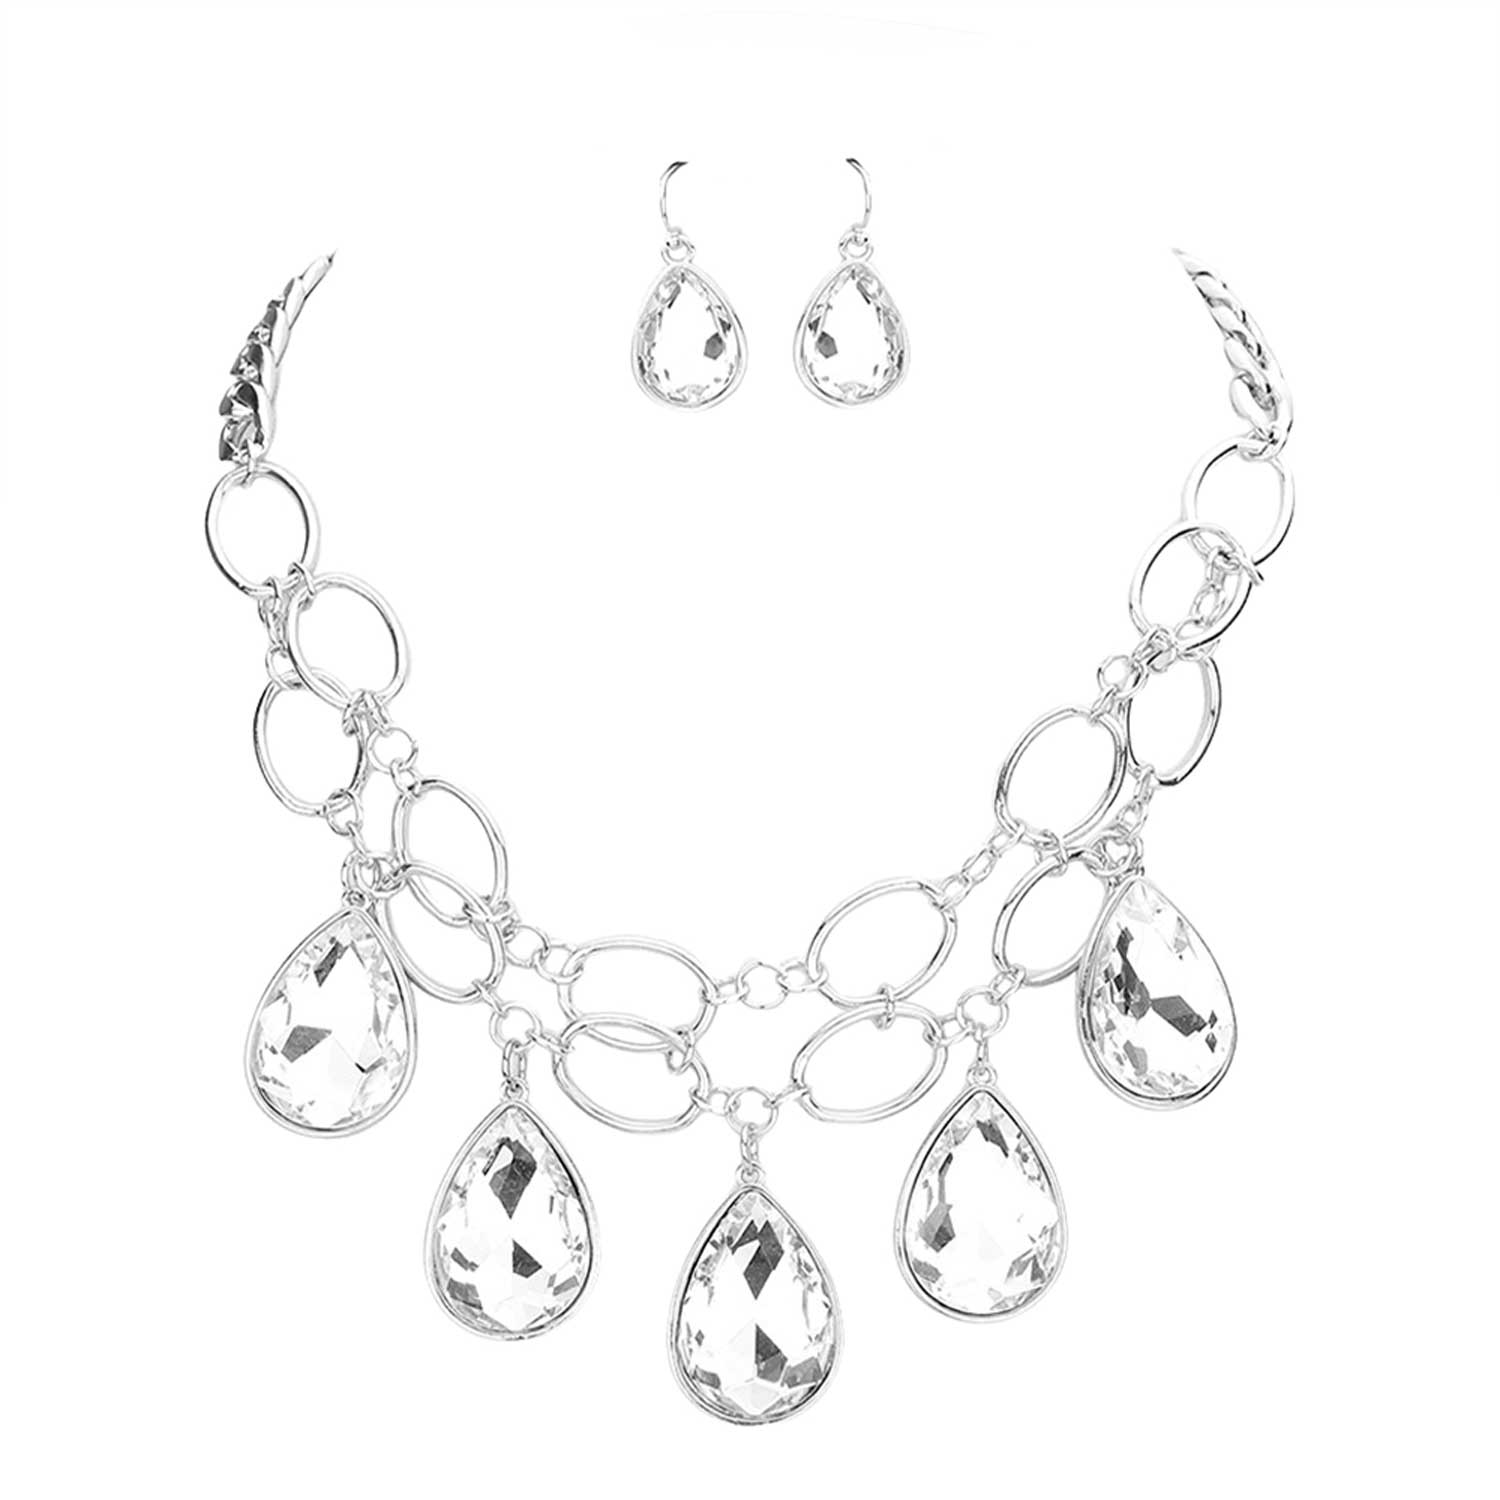 Rhodium Teardrop Stone Accented Open Metal Oval Link Evening Necklace, this gorgeous jewelry set will show your class on any special occasion. The elegance of these stones goes unmatched, great for wearing at a party! stunning jewelry set will sparkle all night long making you shine like a diamond on special occasions. Perfect jewelry to enhance your look and for wearing at parties, weddings, date nights, or any special event.